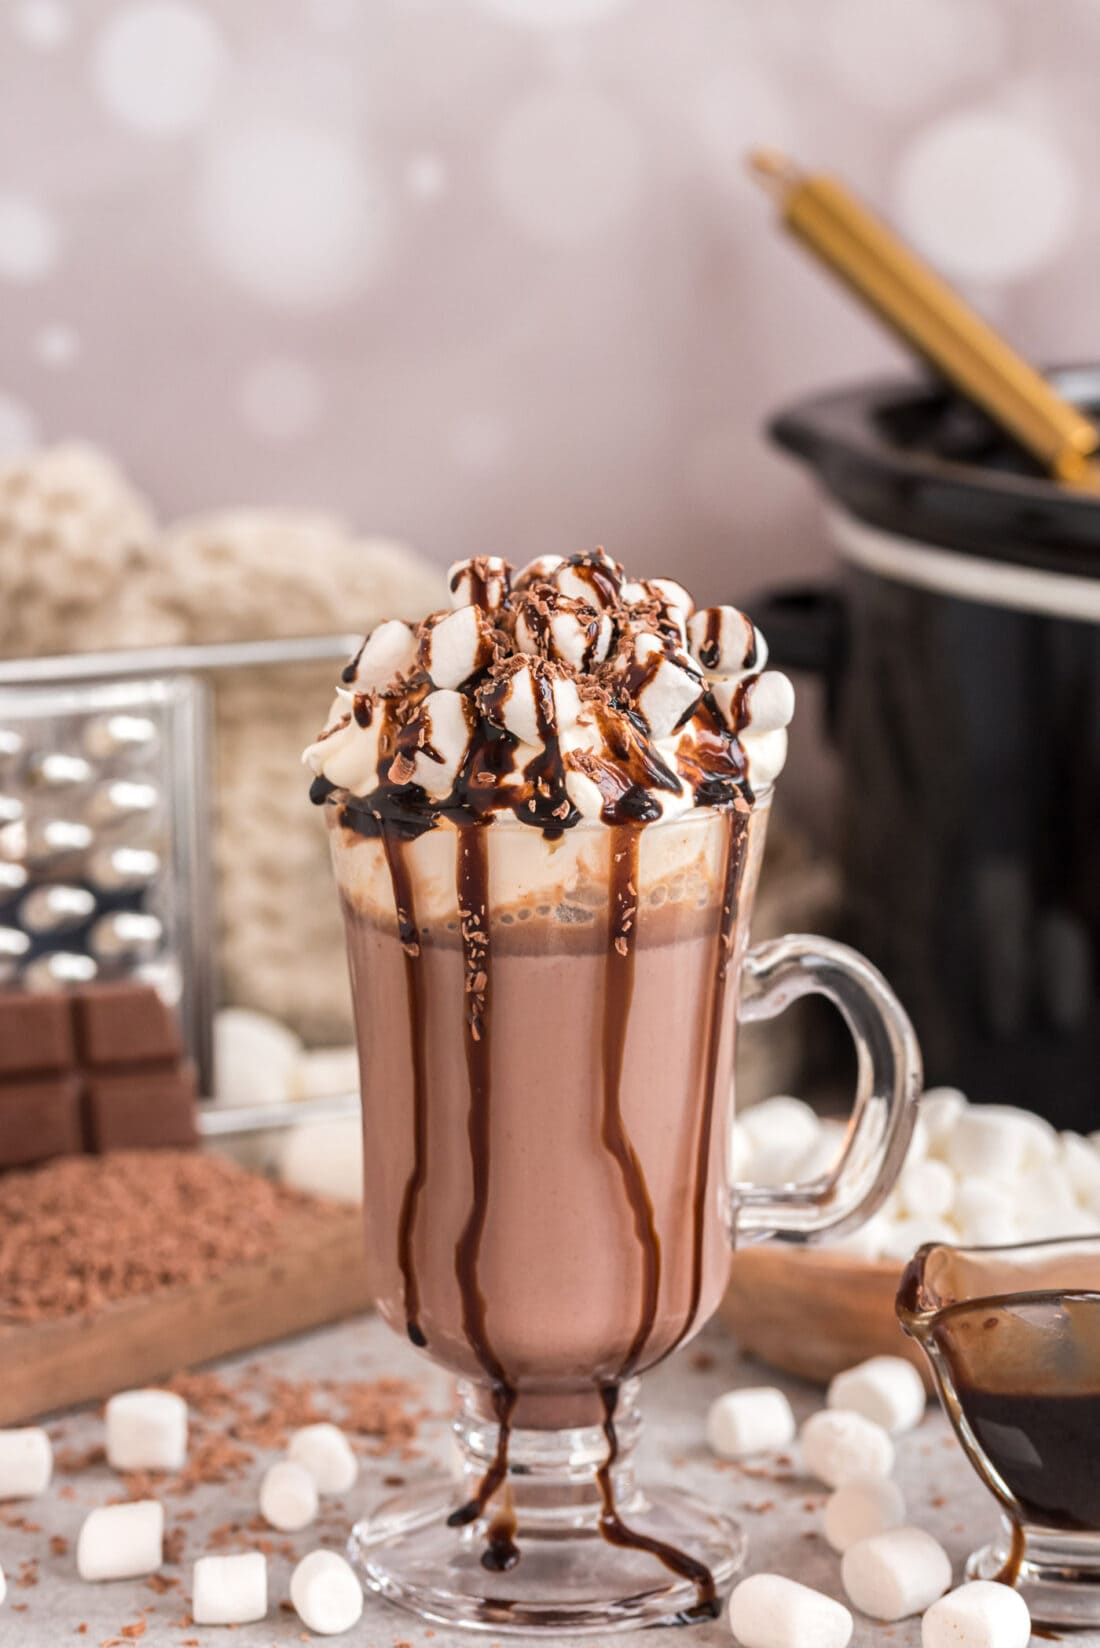 Crockpot Hot Chocolate in a mug topped with marshmallows and chocolate drizzle